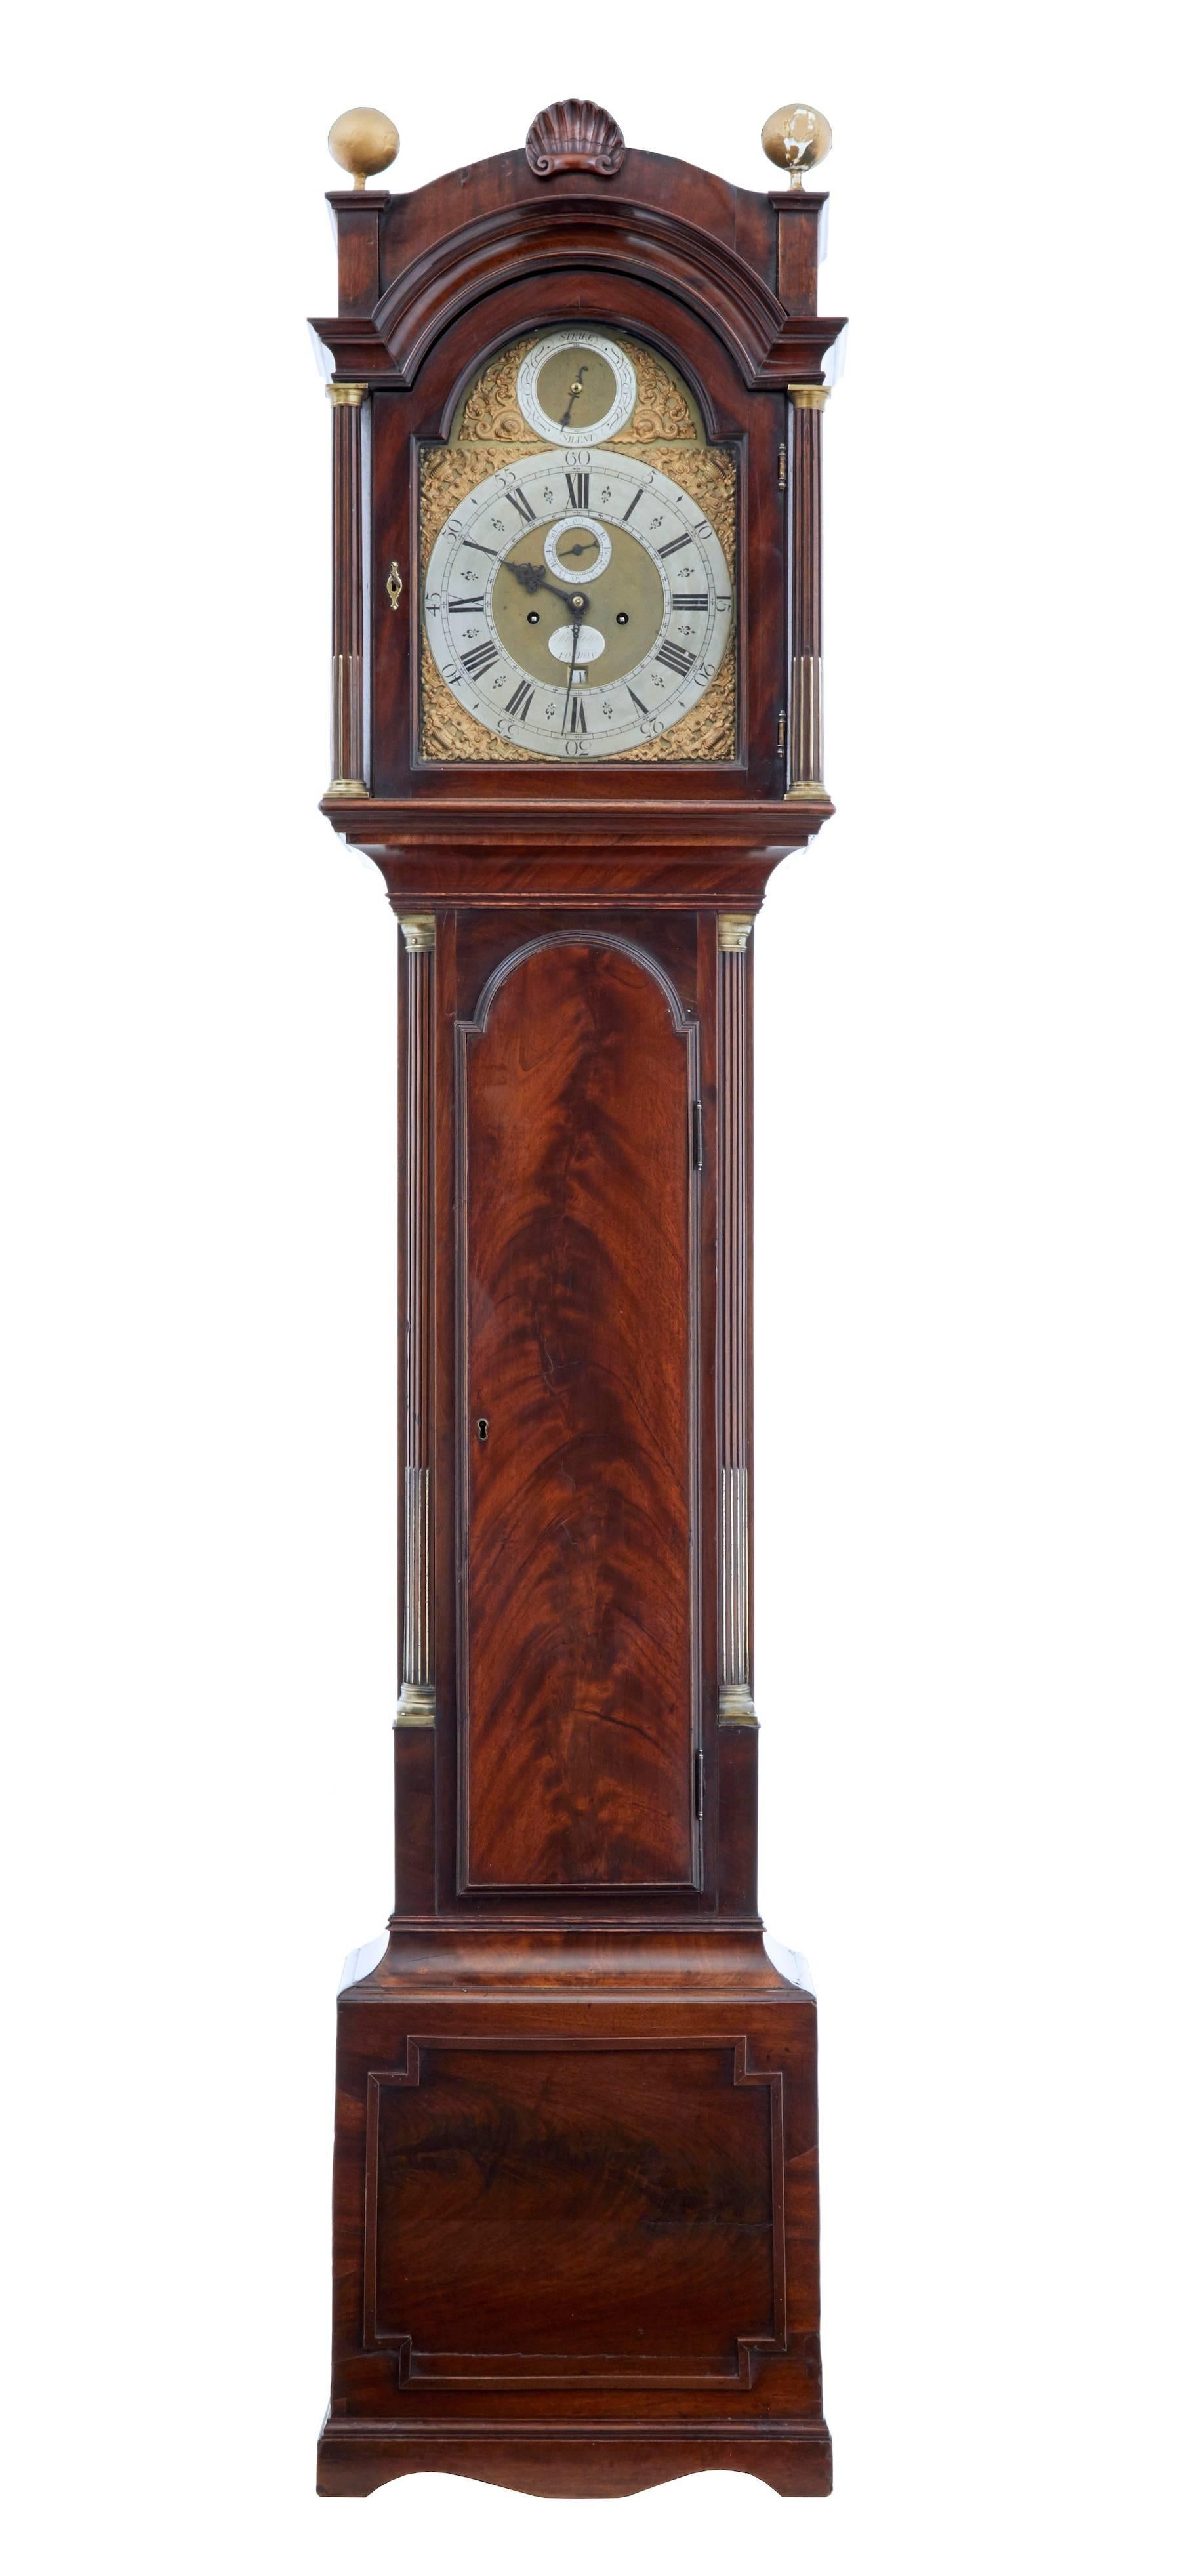 Georgian longcase clock in mahogany, circa 1790
Movement made and signed by the well-known movement maker John Purden of London.
Movement with roman and Arabic numerals.
Movement has been professionally service.
Hood with glazed door for